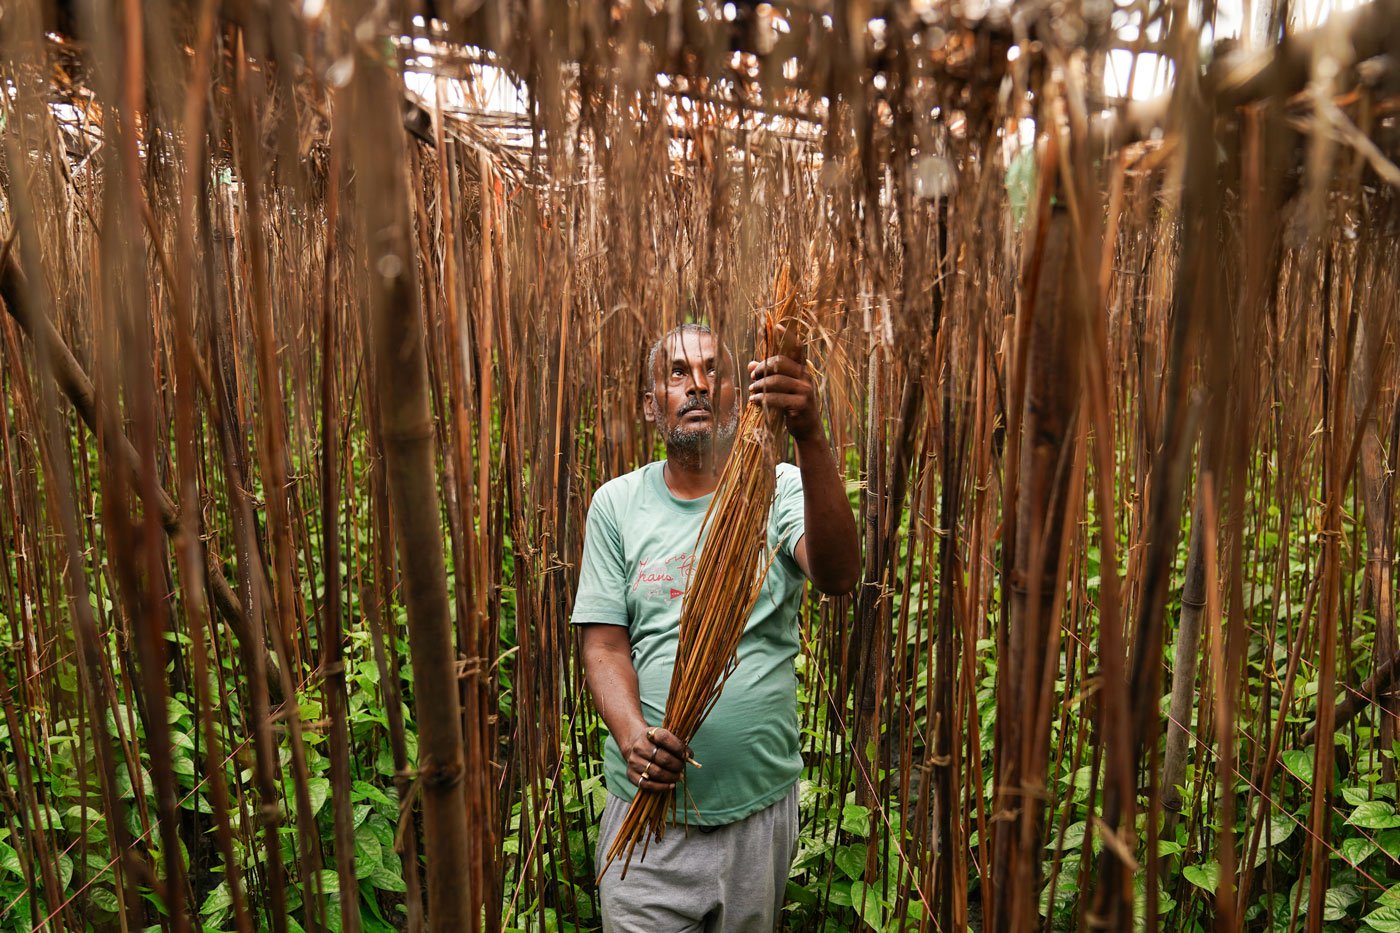 Uncertainty of weather and subsequent crop losses, has forced many farmers of Dheuri village to give up betel cultivation. 'Till 10 years ago, more than 150 farmers used to cultivate betel leaf in 10 hectares, but now their number has reduced to less than 100 and currently it is being grown in 7-8 hectares,' says Ranjit Chaurasia